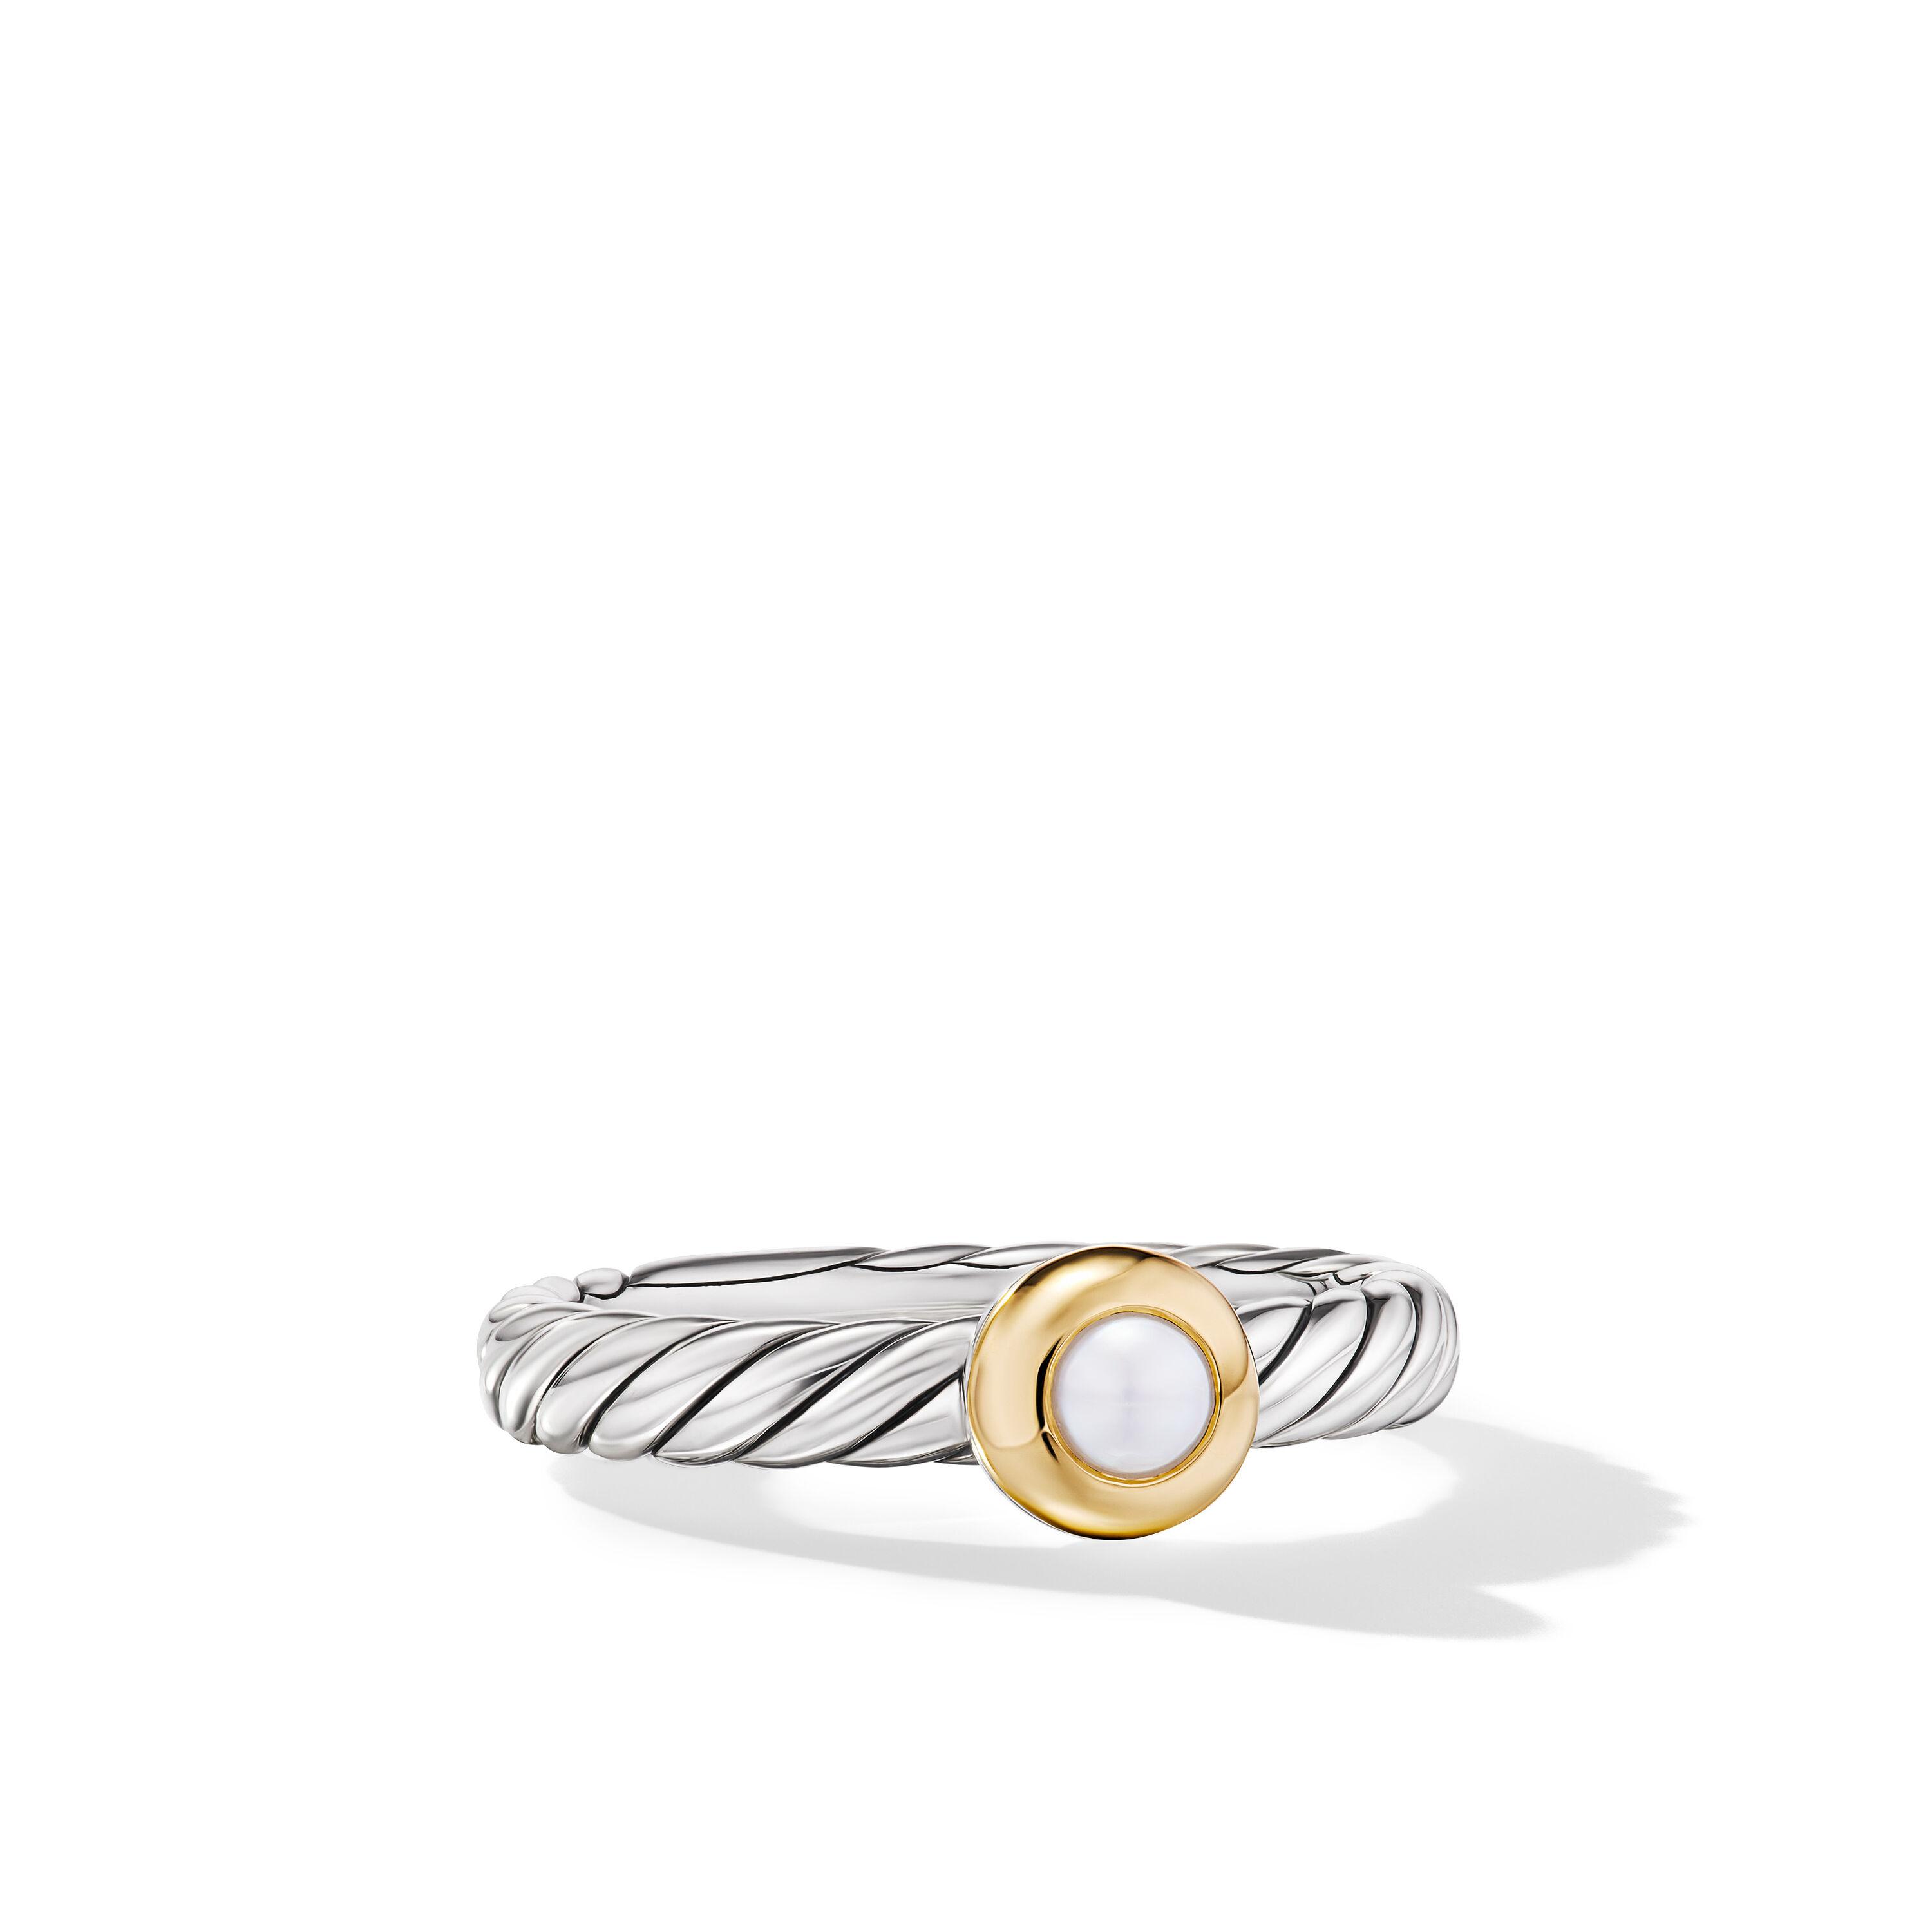 David Yurman Petite Cable Ring in Sterling Silver with 14K Yellow Gold and Pearl, Size 6 0